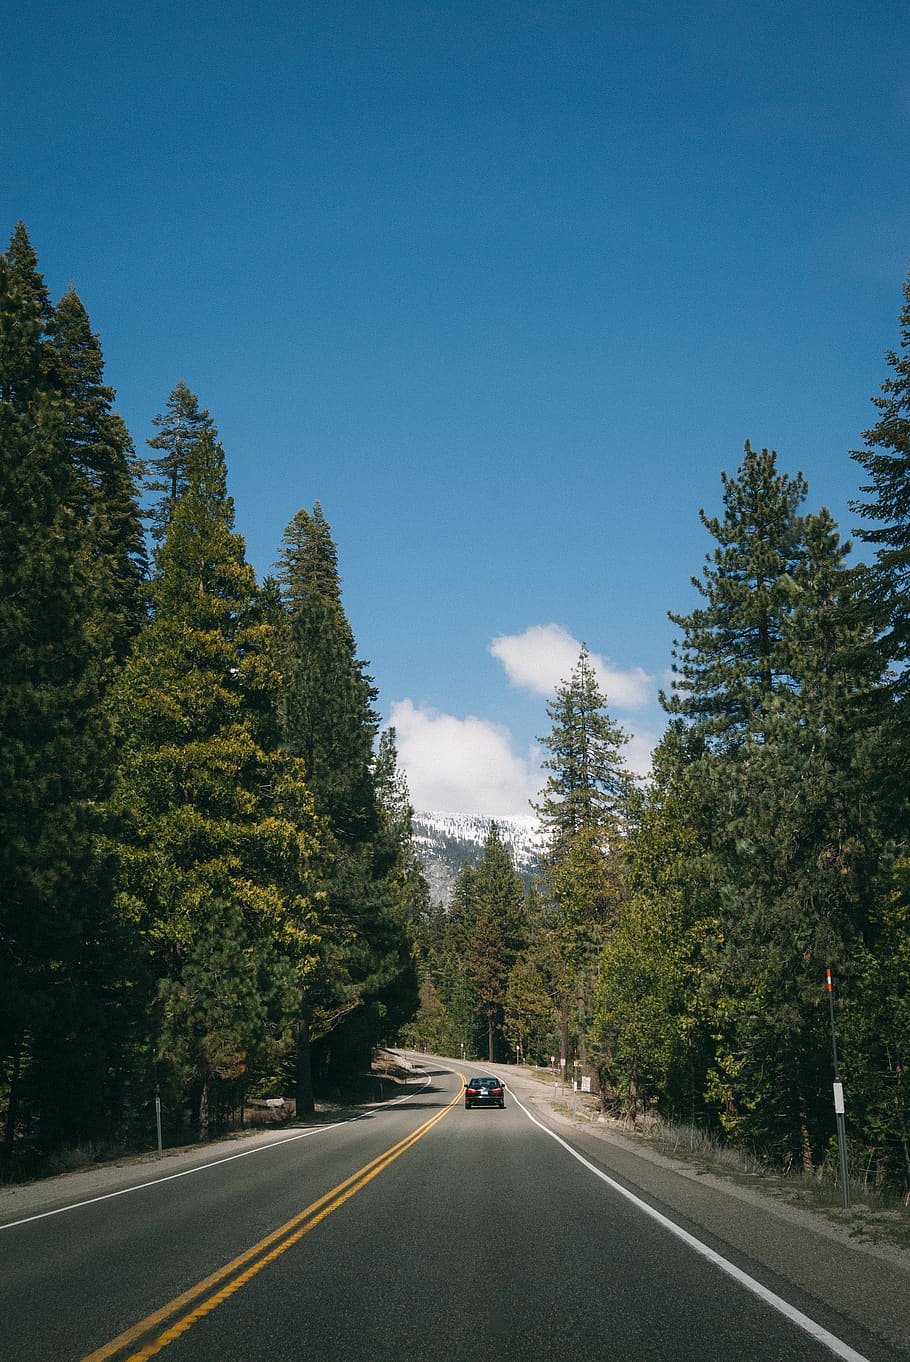 united states, south lake tahoe, forest, woods, trees, car